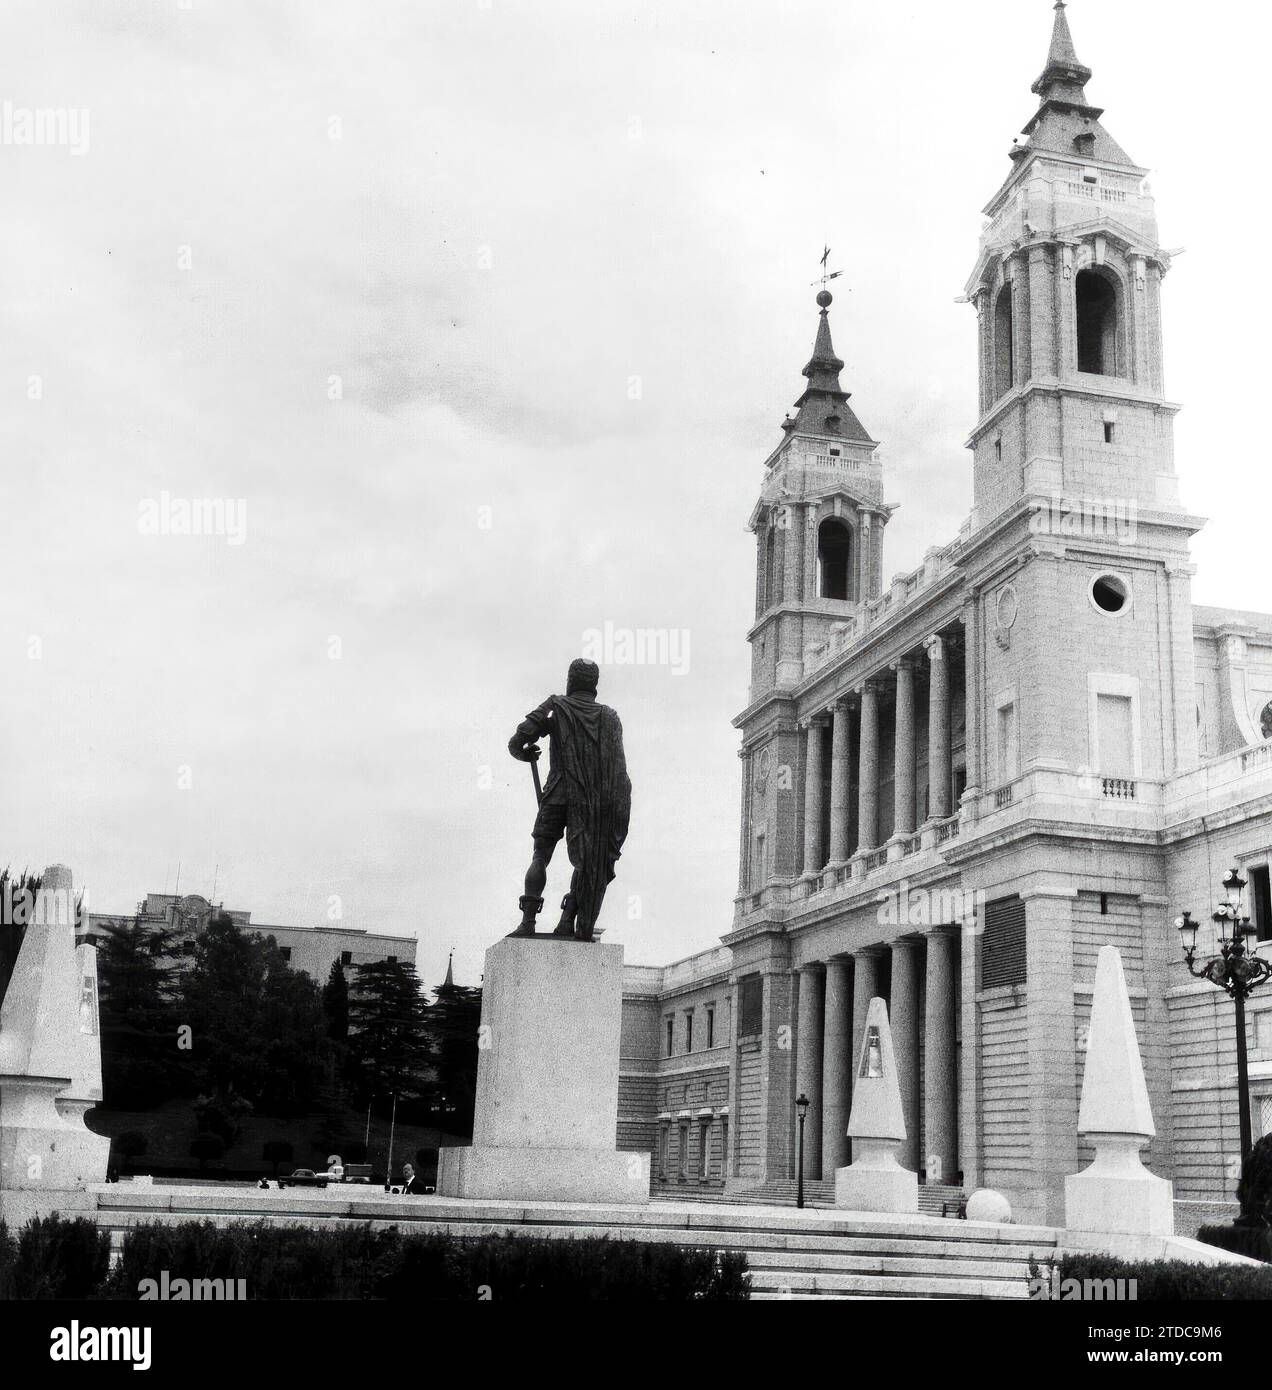 04/30/1962. The statue of Felipe II that was removed, in an archive image. Credit: Album / Archivo ABC / Manuel Sanz Bermejo Stock Photo